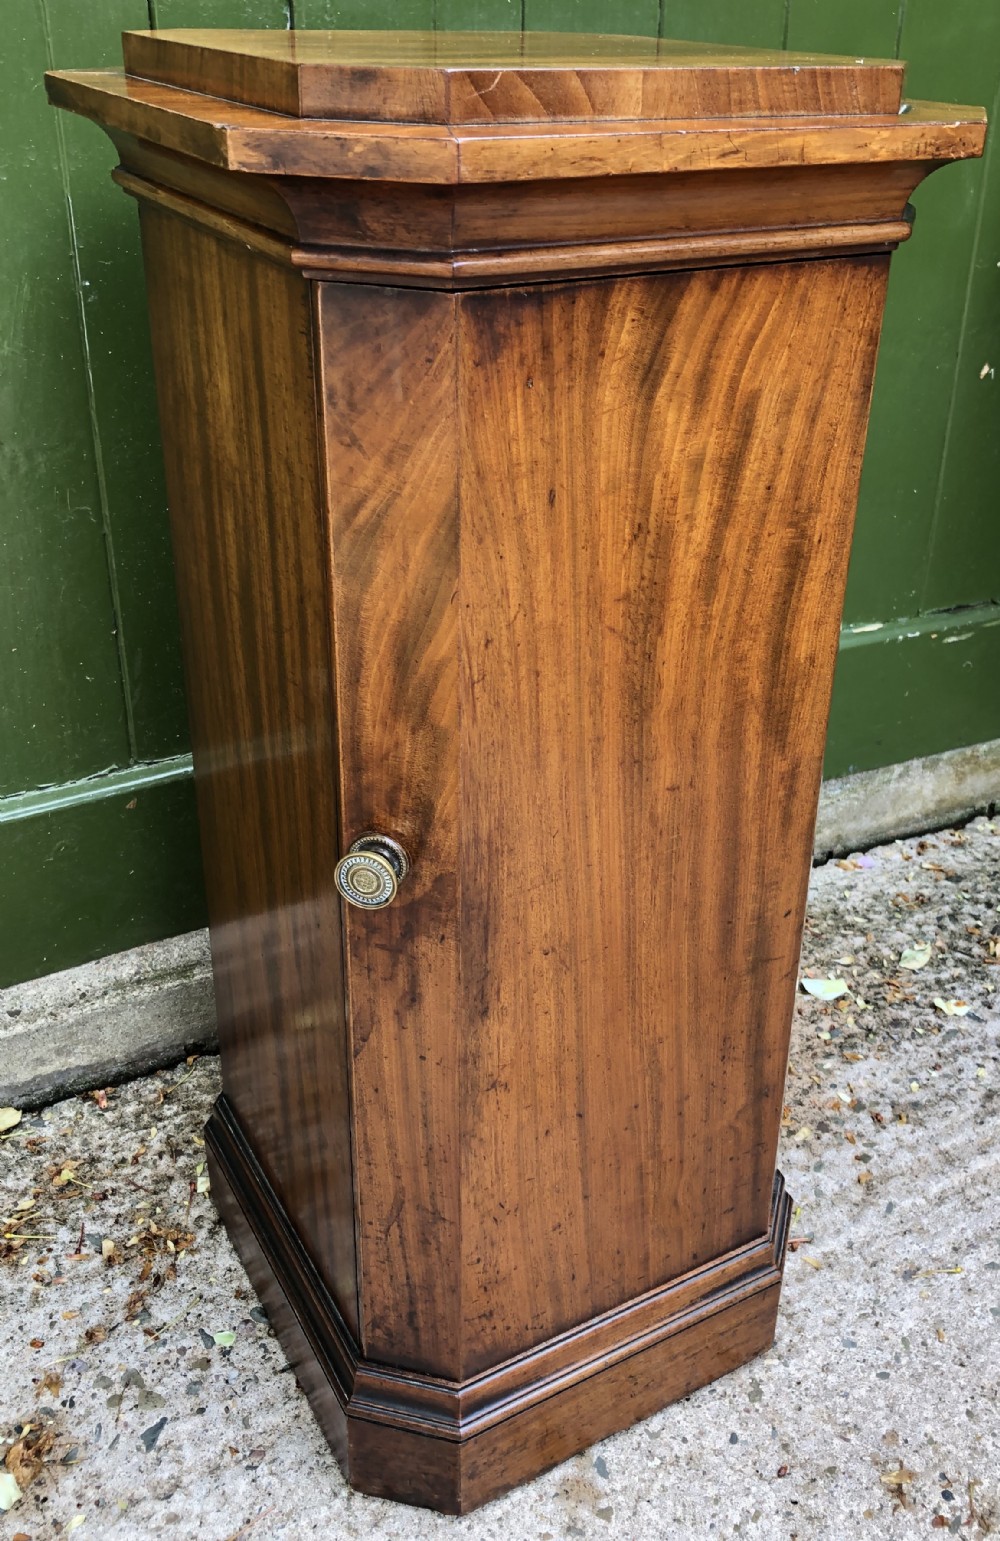 early c19th regency period mahogany pedestal bedside cupboard of architectural column design